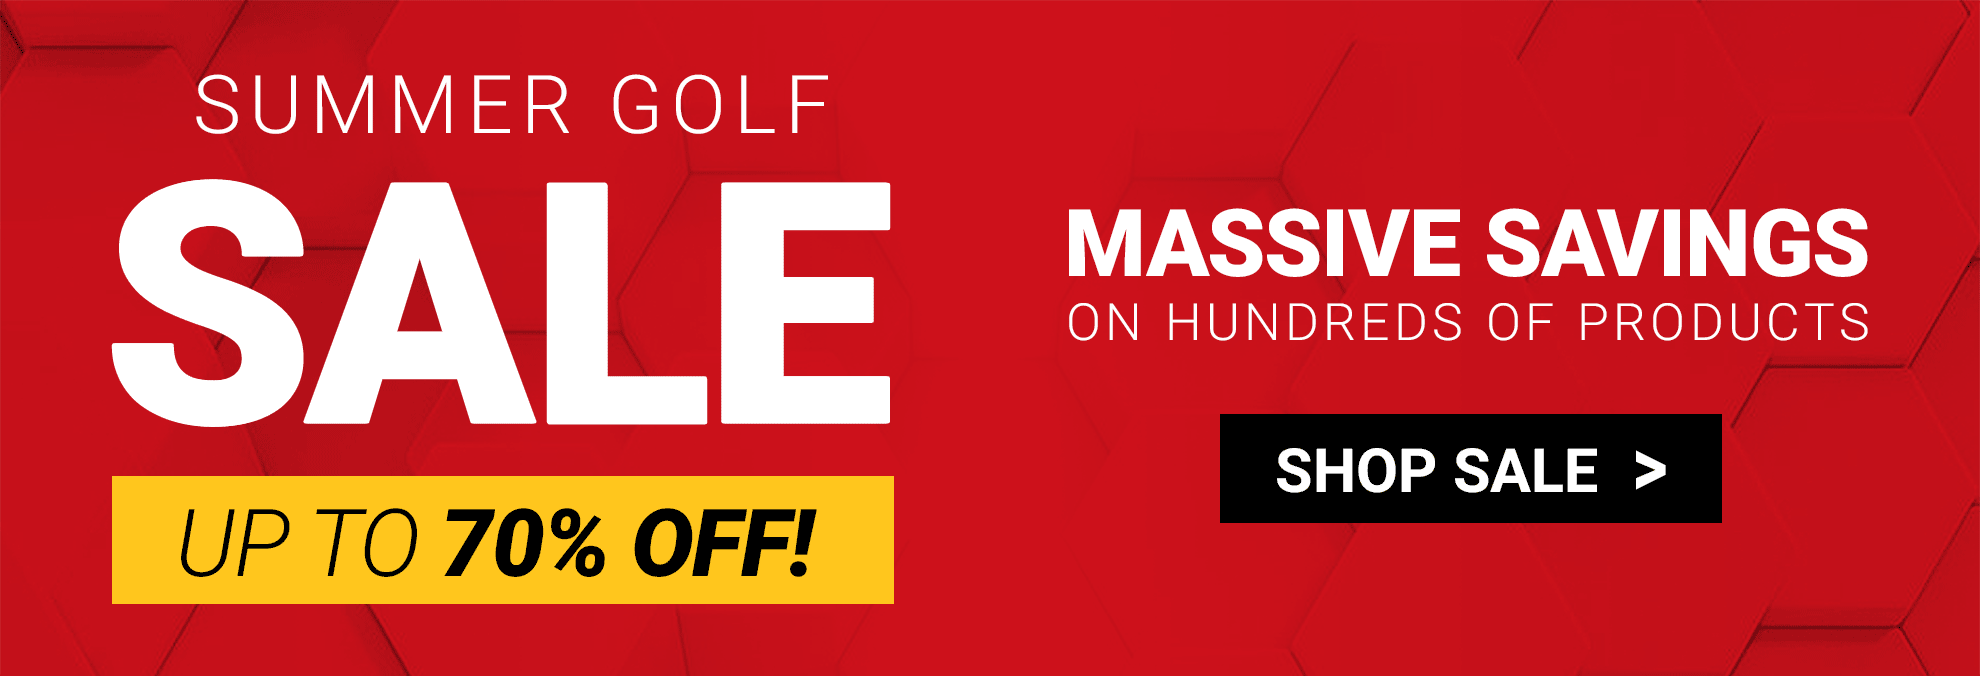 Summer Golf Sale - Up To 70% Off!